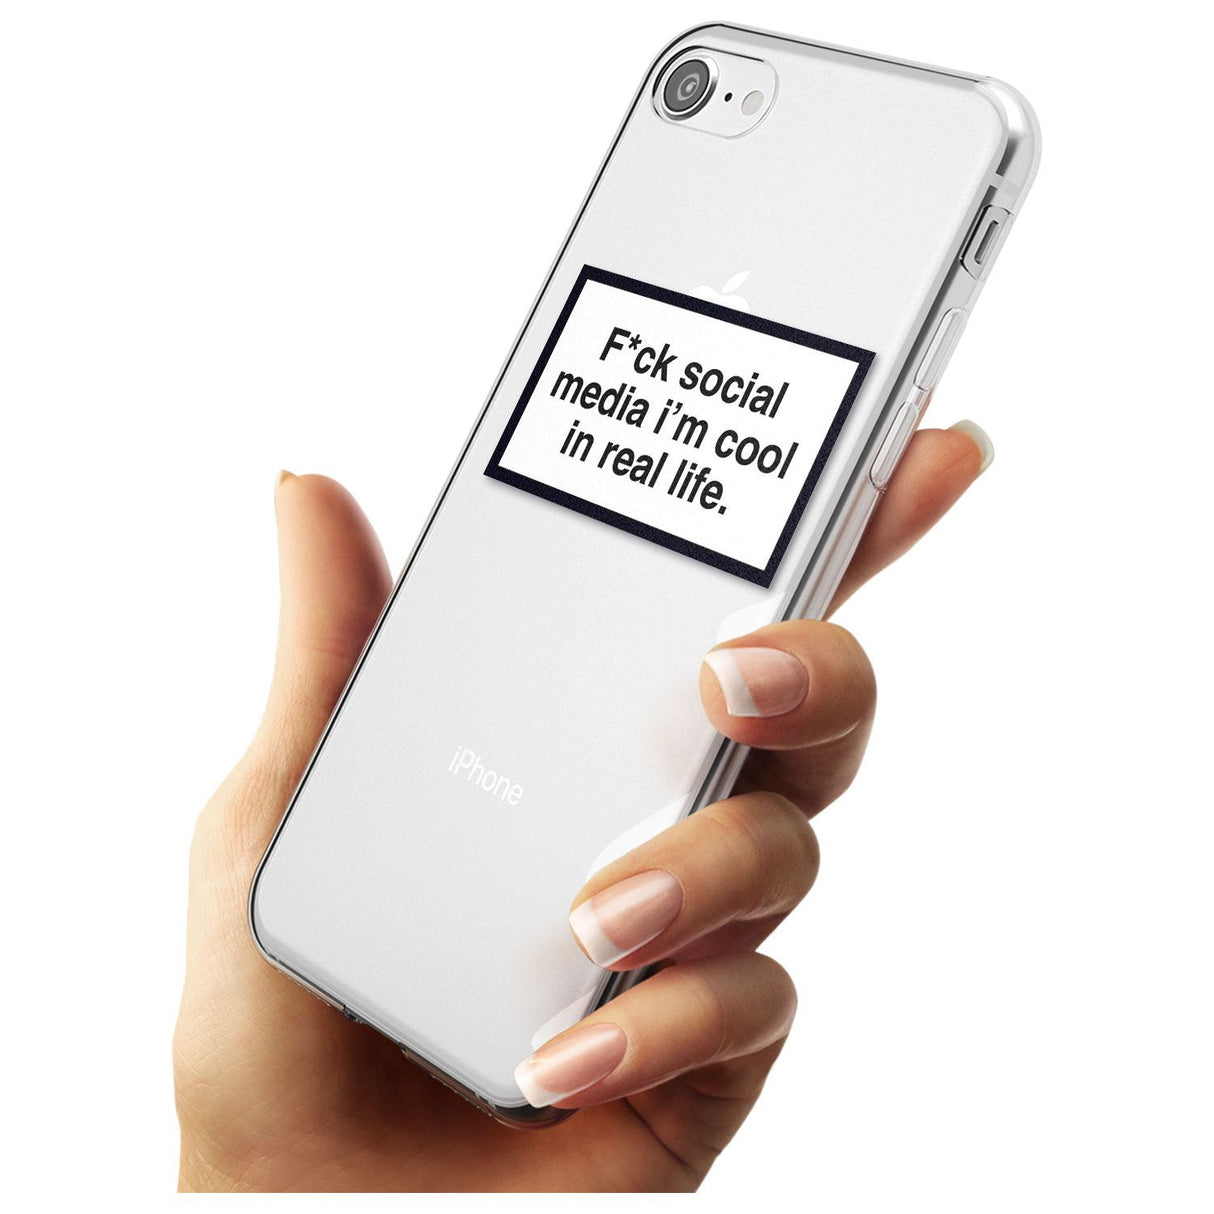 F*ck social media I'm cool in real life Black Impact Phone Case for iPhone SE 8 7 Plus